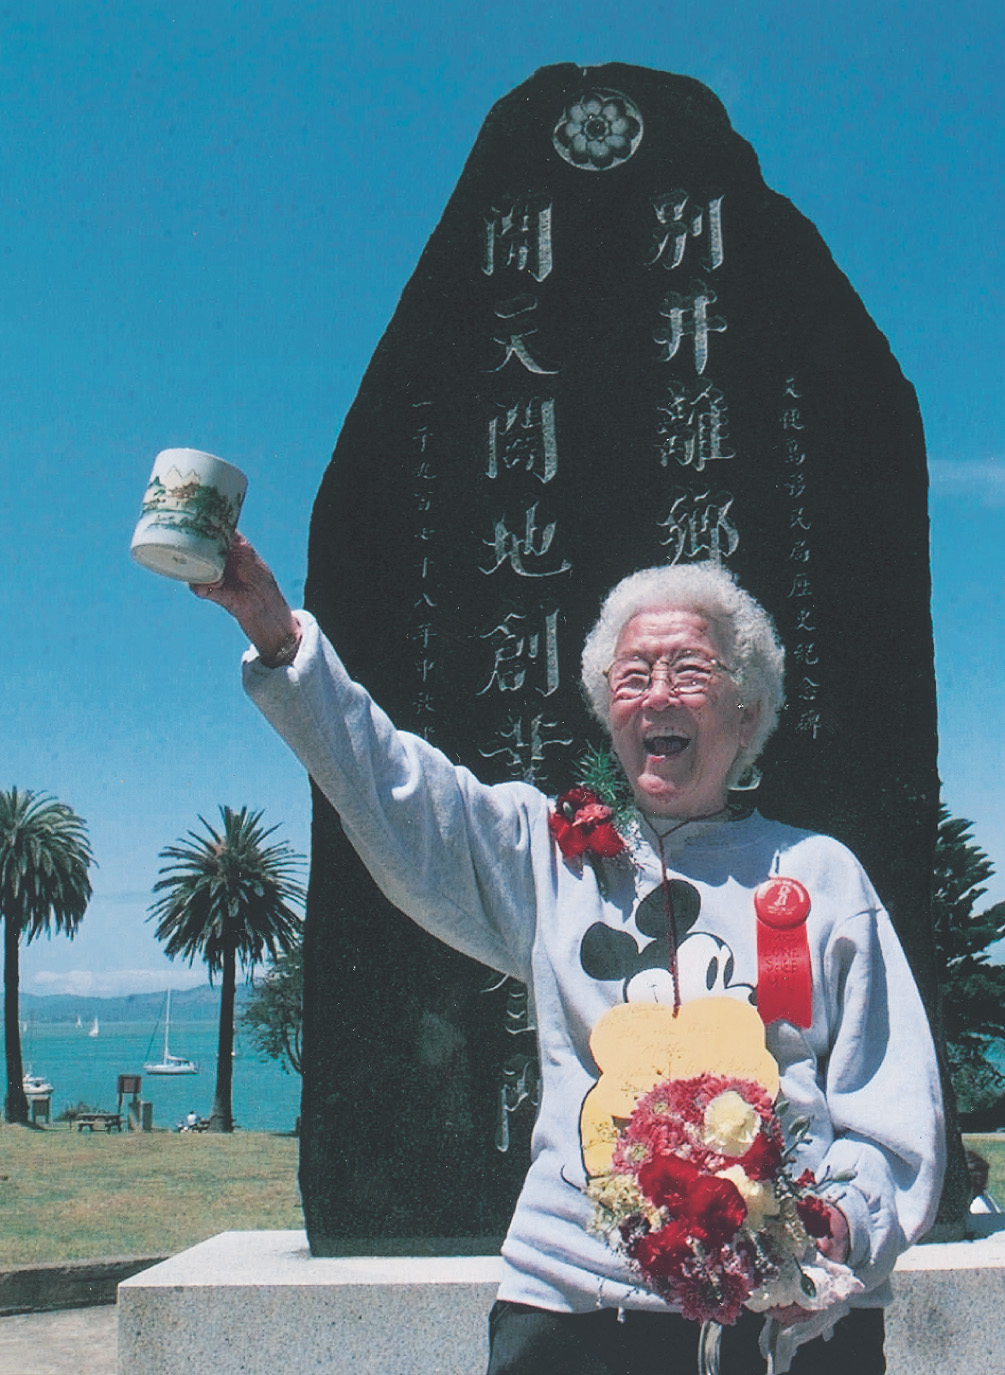 Photo: a white-haired Asian woman raises a mug in front of a monument.